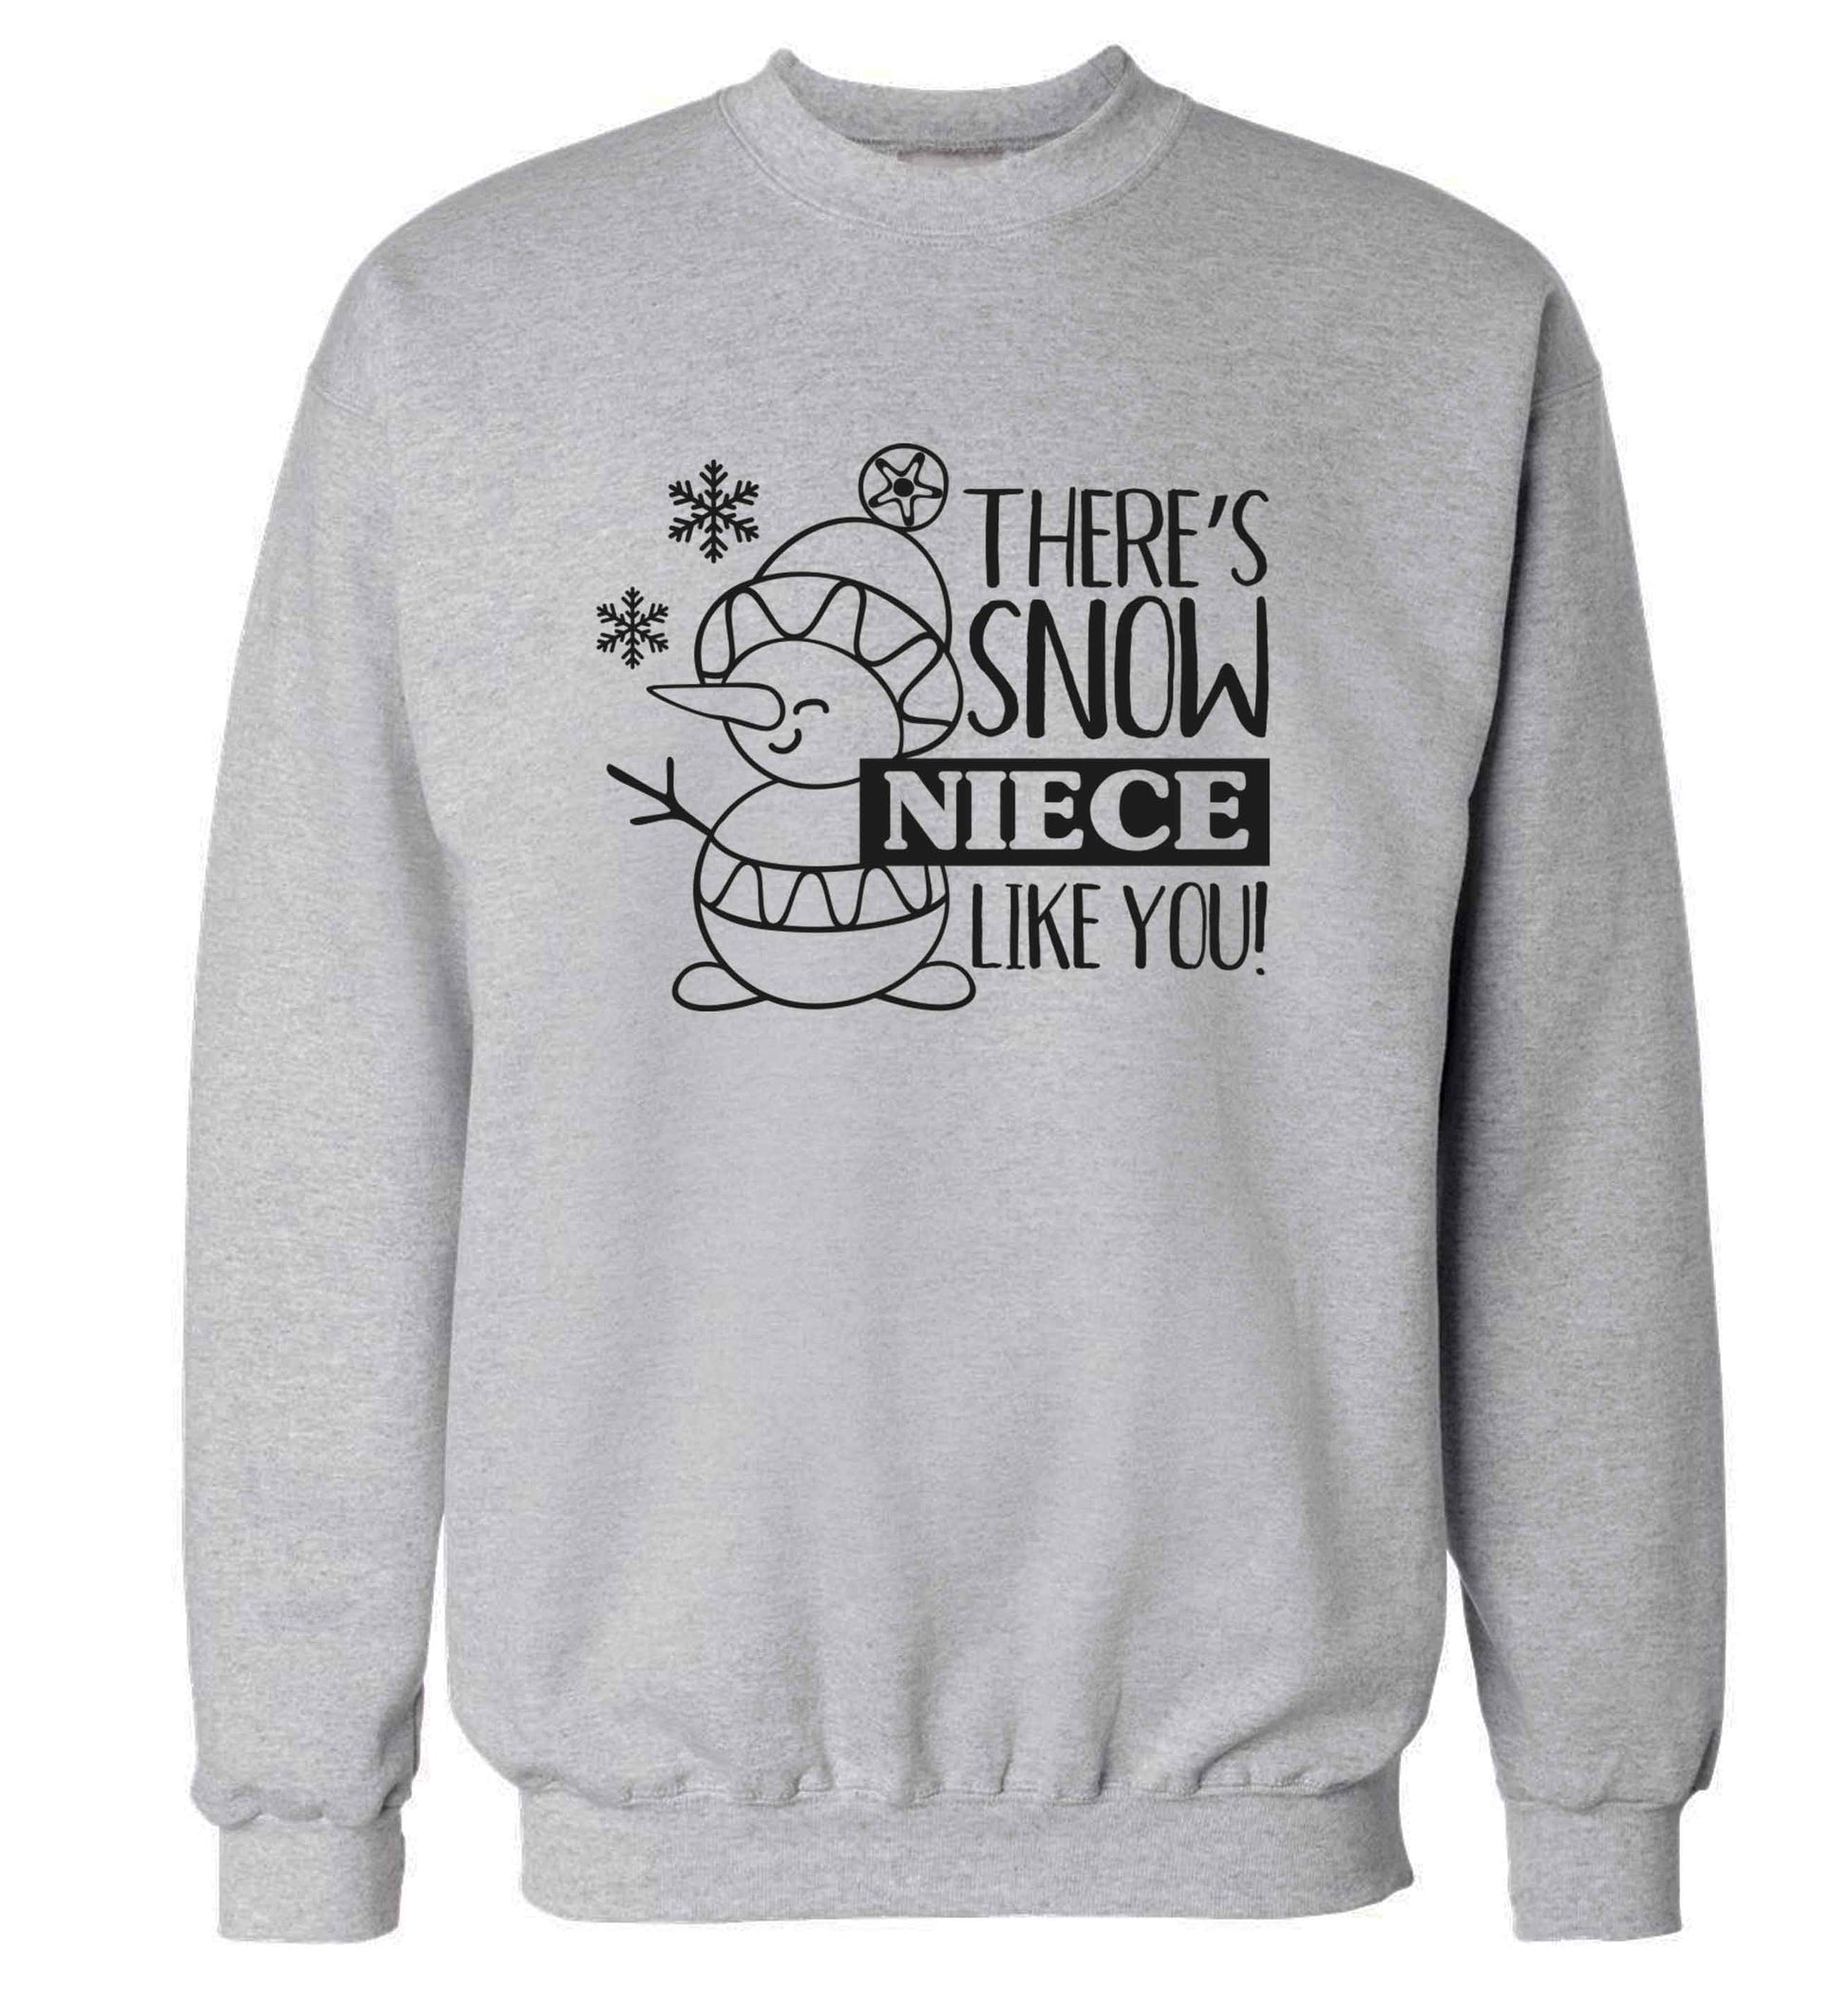 There's snow niece like you adult's unisex grey sweater 2XL